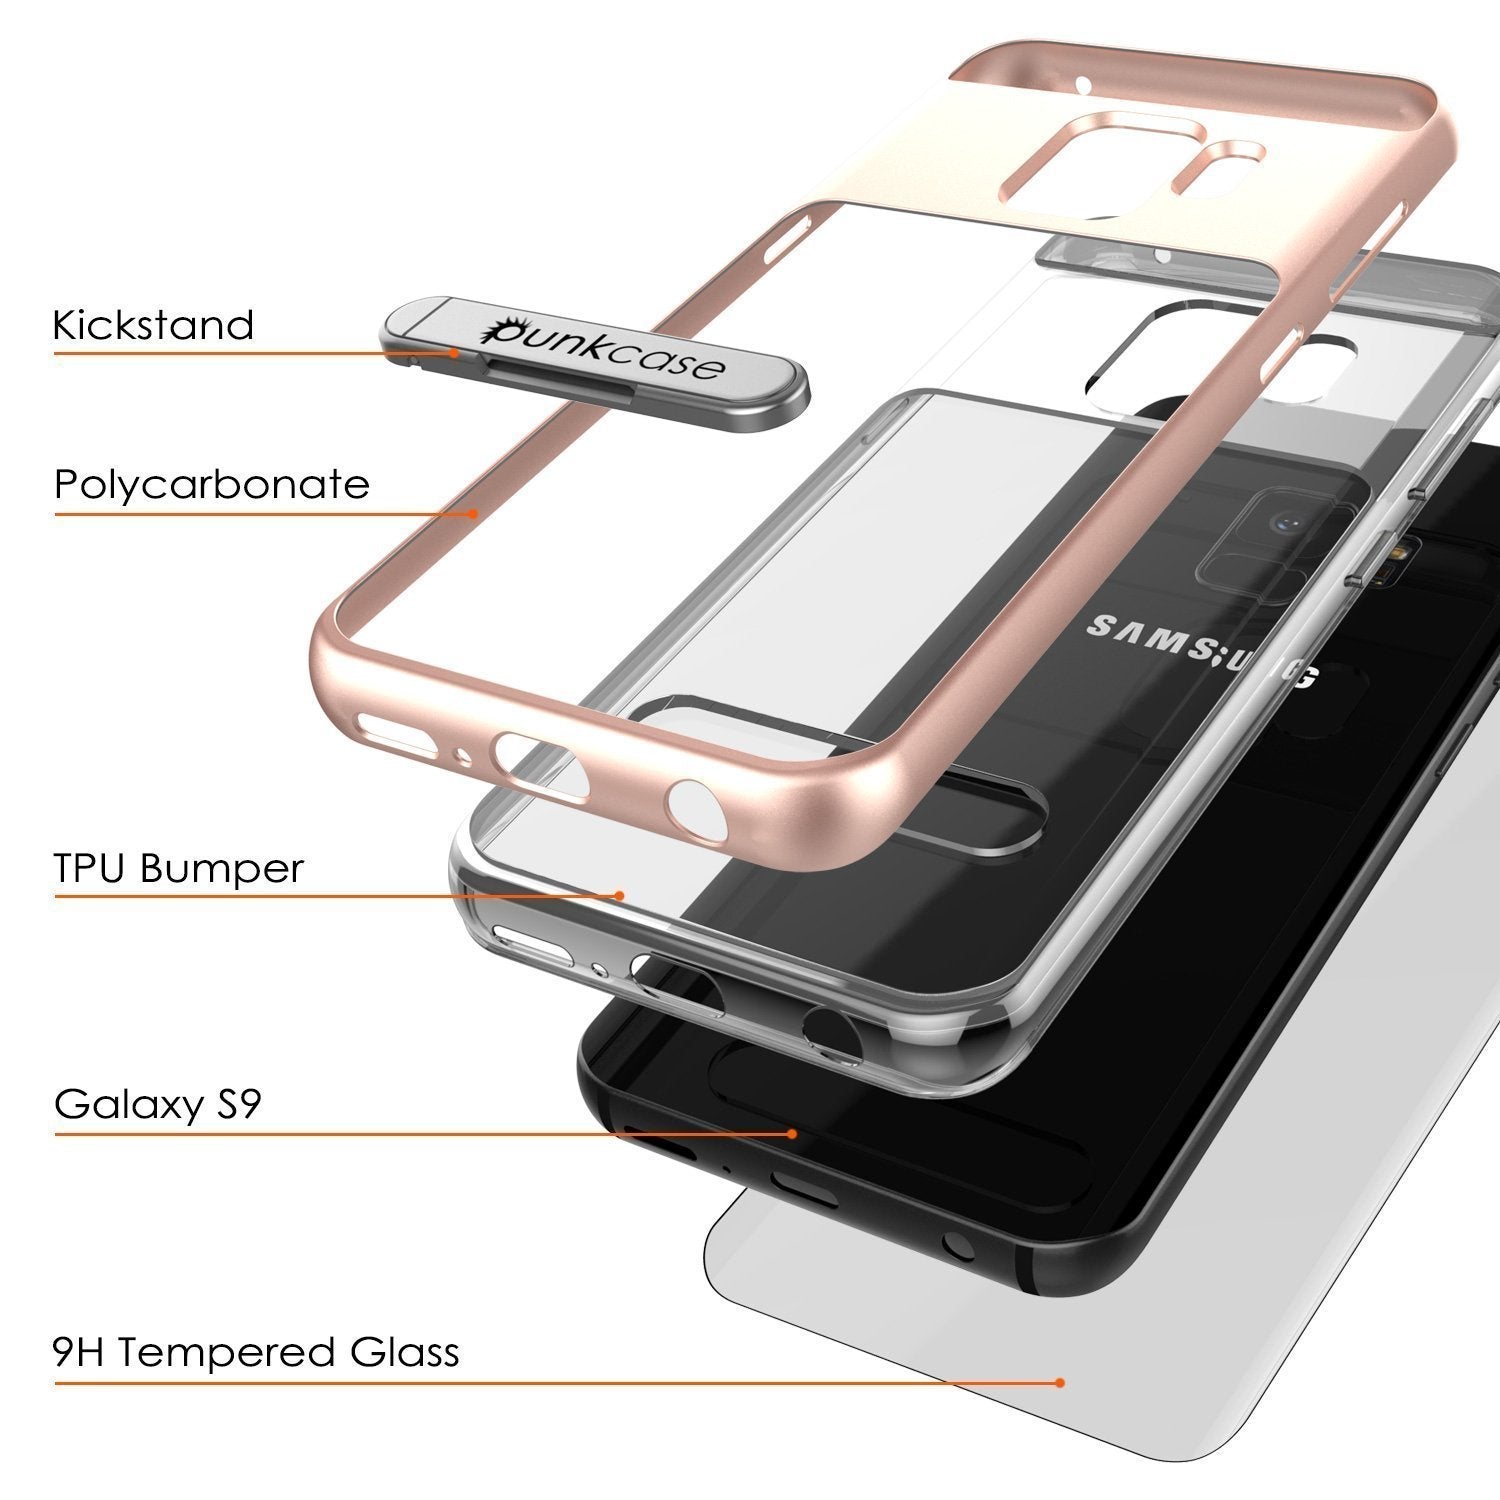 Galaxy S10e Case, PUNKcase [LUCID 3.0 Series] [Slim Fit] Armor Cover w/ Integrated Screen Protector [Rose Gold]